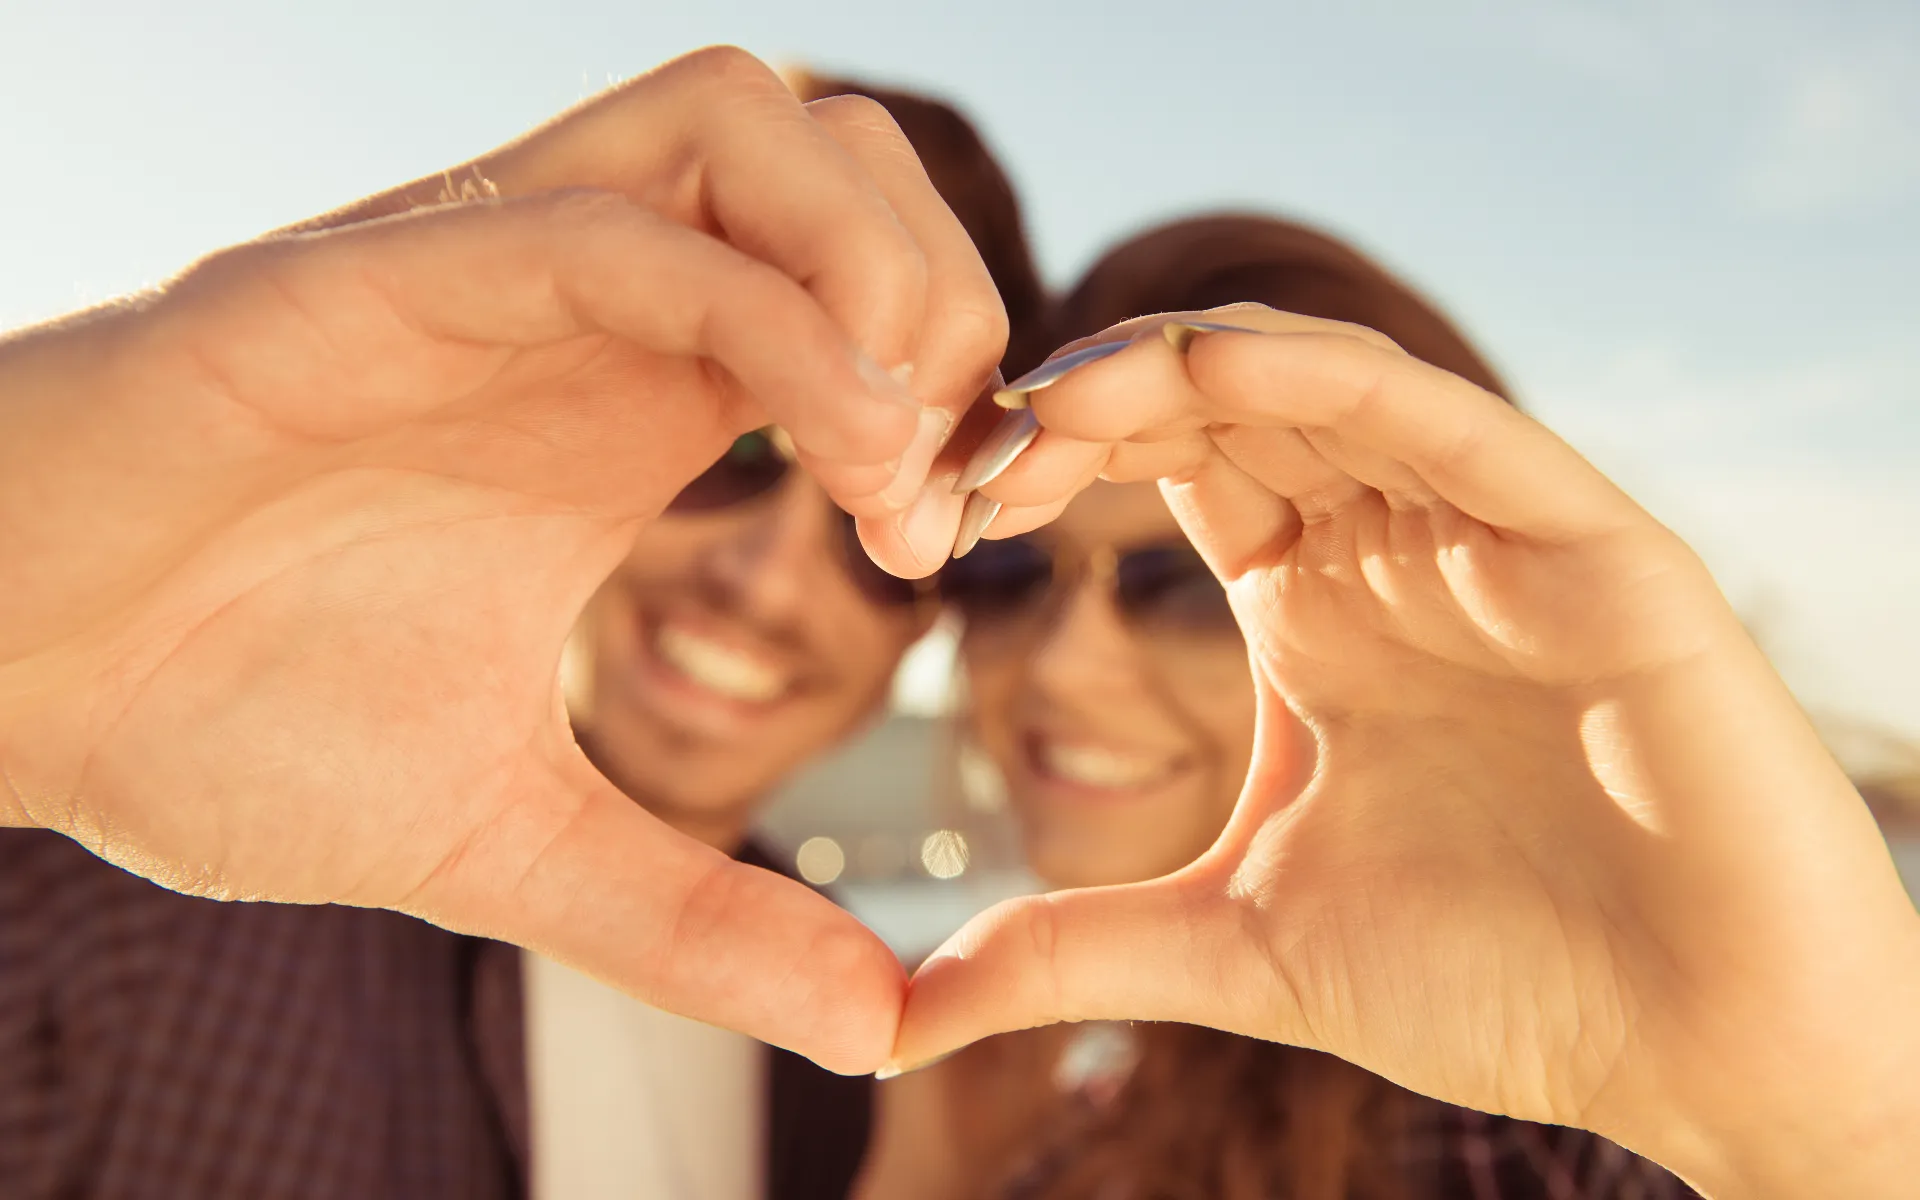 20 Qualities That Make People Fall in Love With You